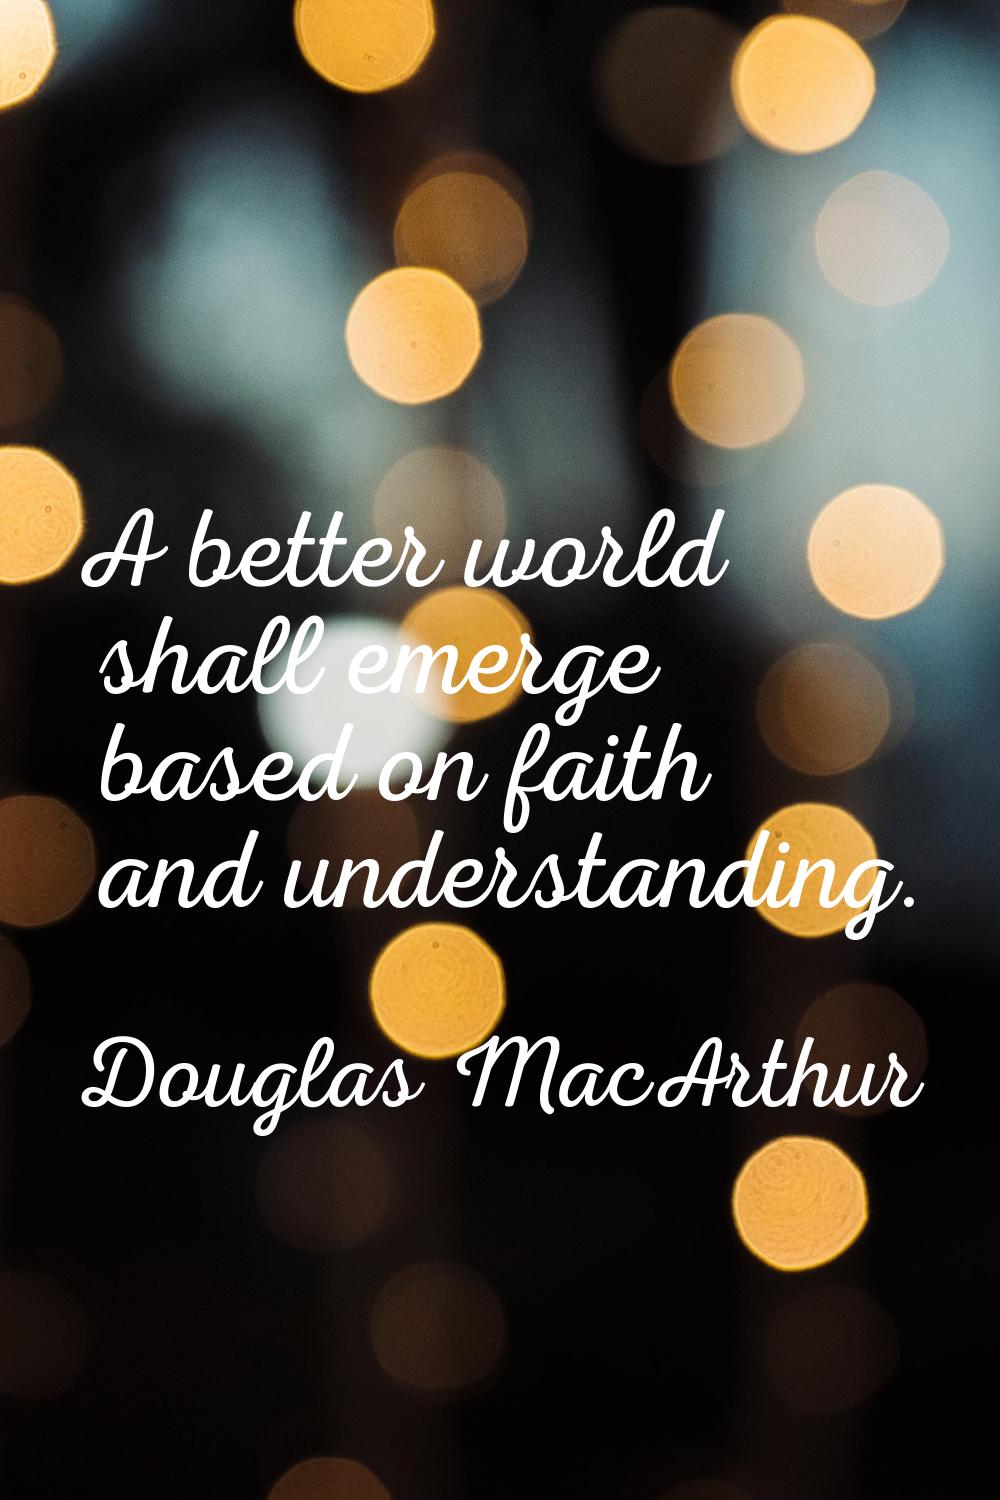 A better world shall emerge based on faith and understanding.